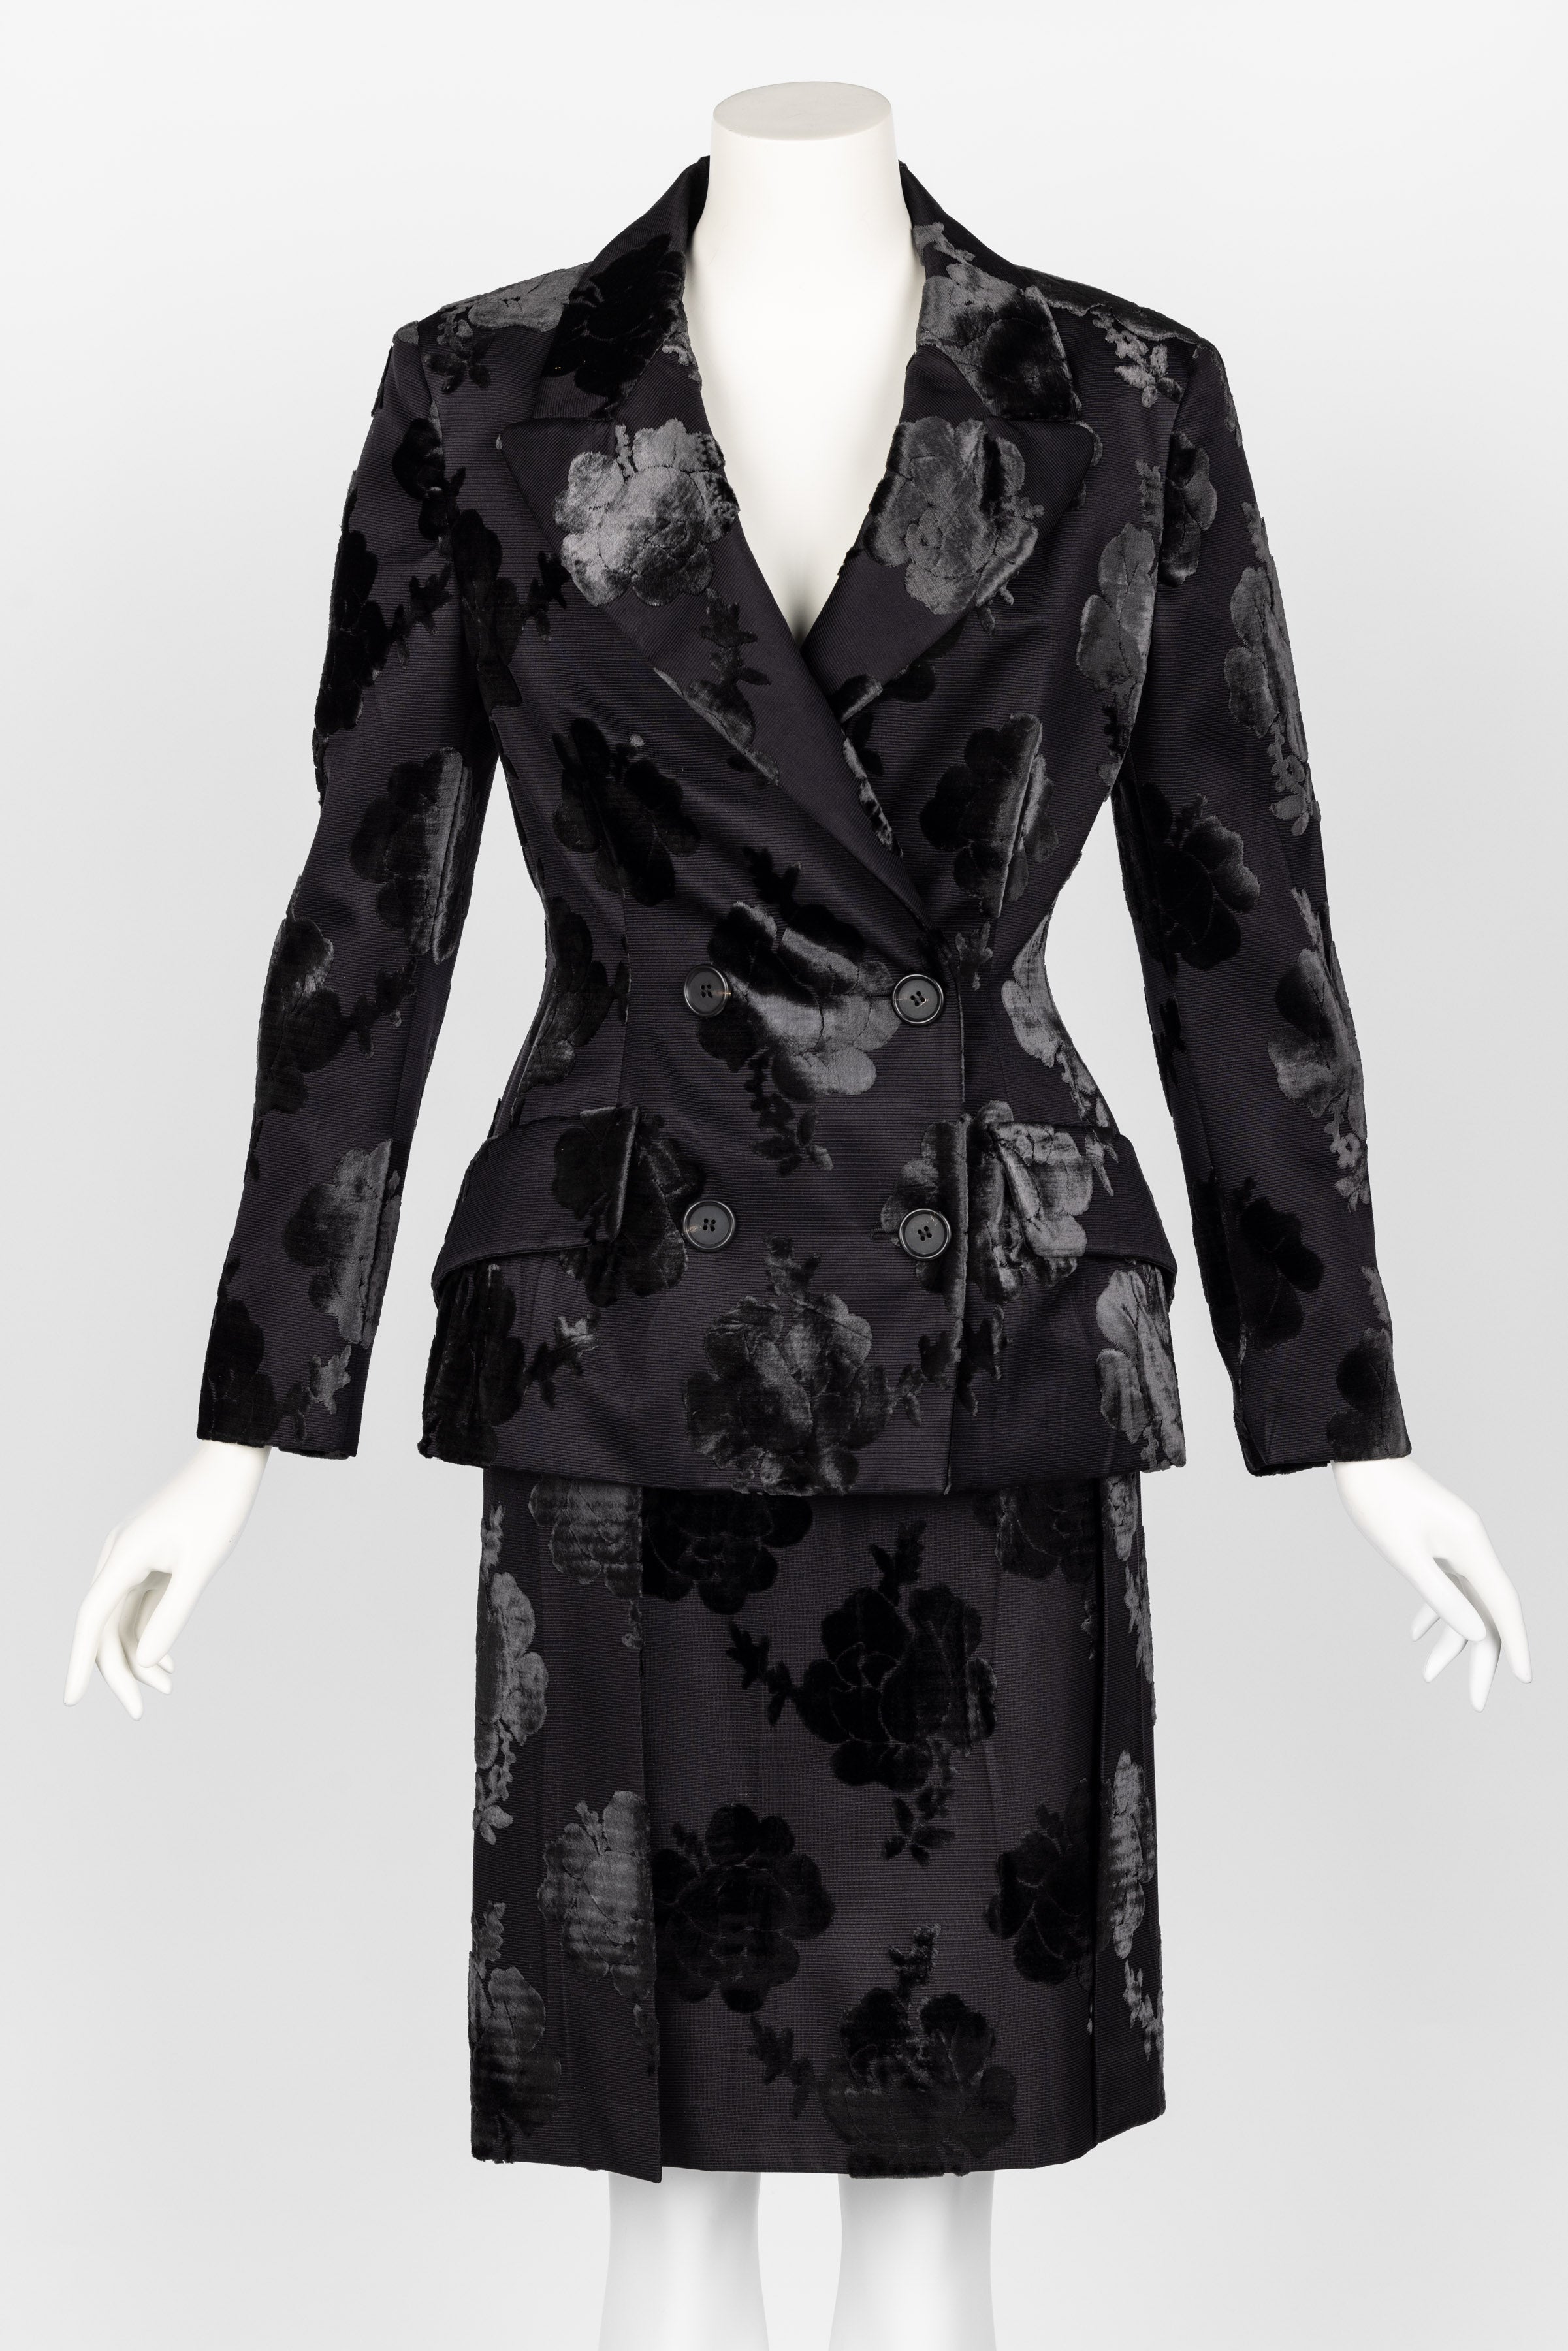 Runway look #32 and in Prada's campaign that season. 
New with tags done in silk with silk velvet floral pattern, fully lined. 
Exceptional and gorgeous!!

Size: 40 IT/ 4 US
Measurements:
Jacket:
Shoulders: 16 inches
Bust:m 34 inches
Waist: 28